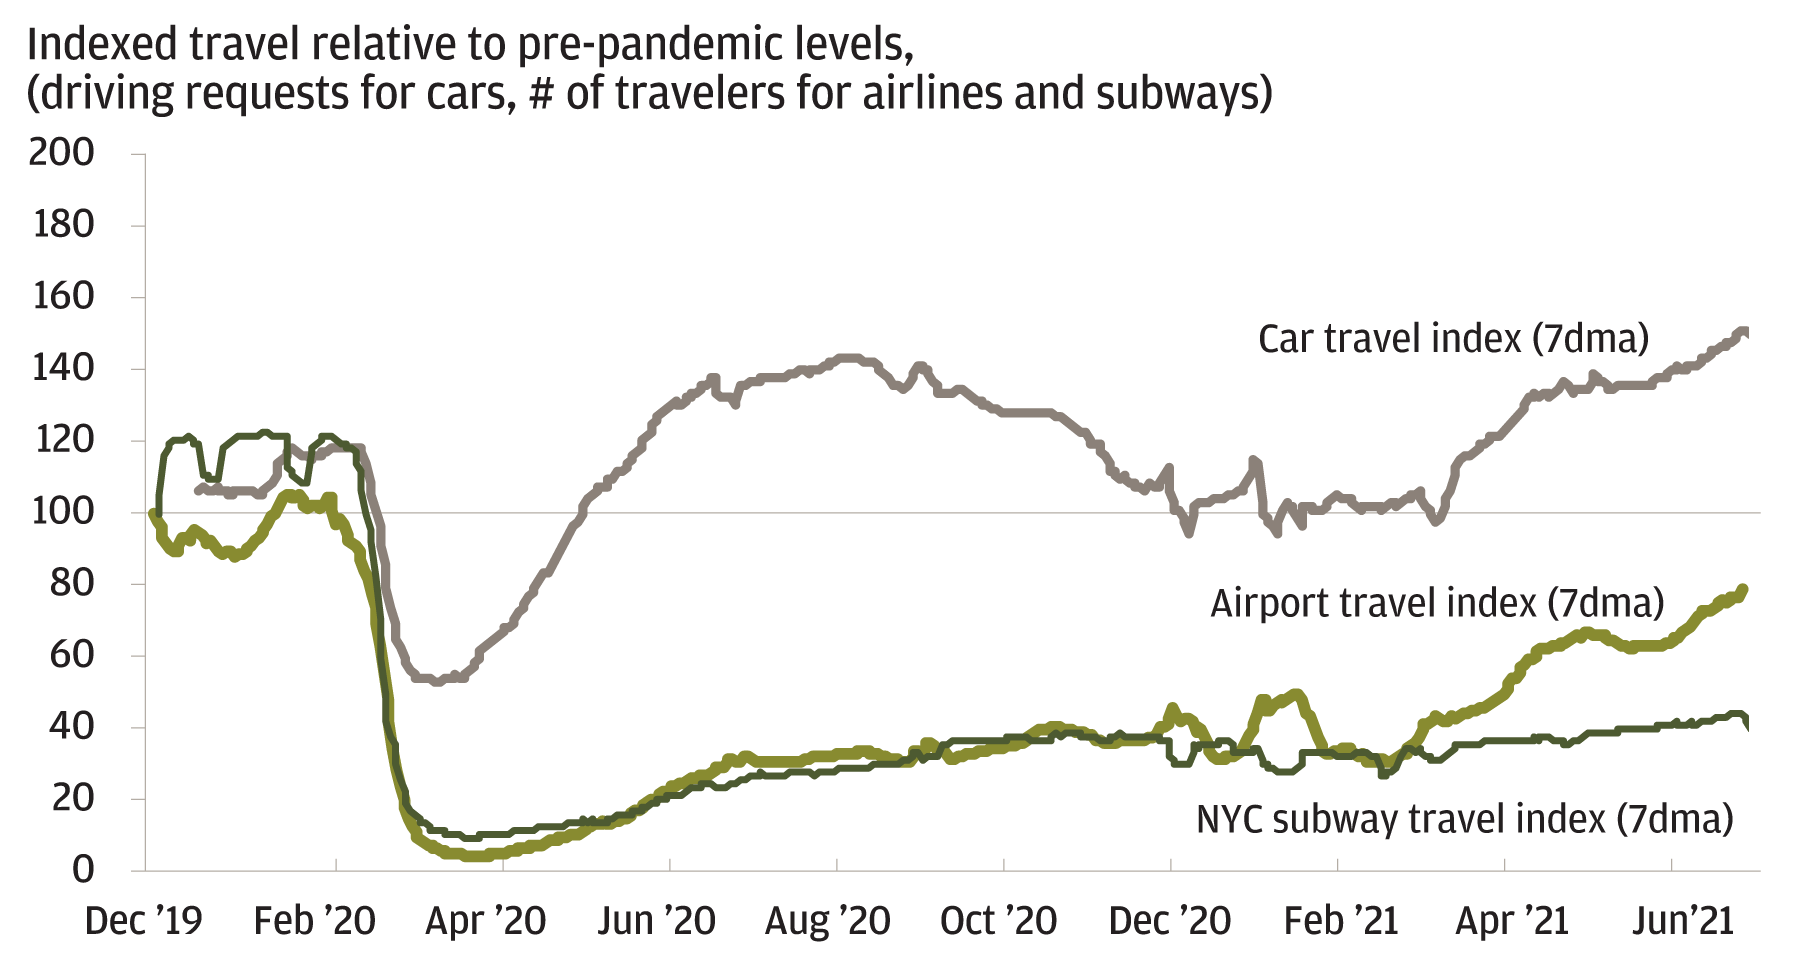 Airline travel in and from the U.S., and public transit, are still depressed